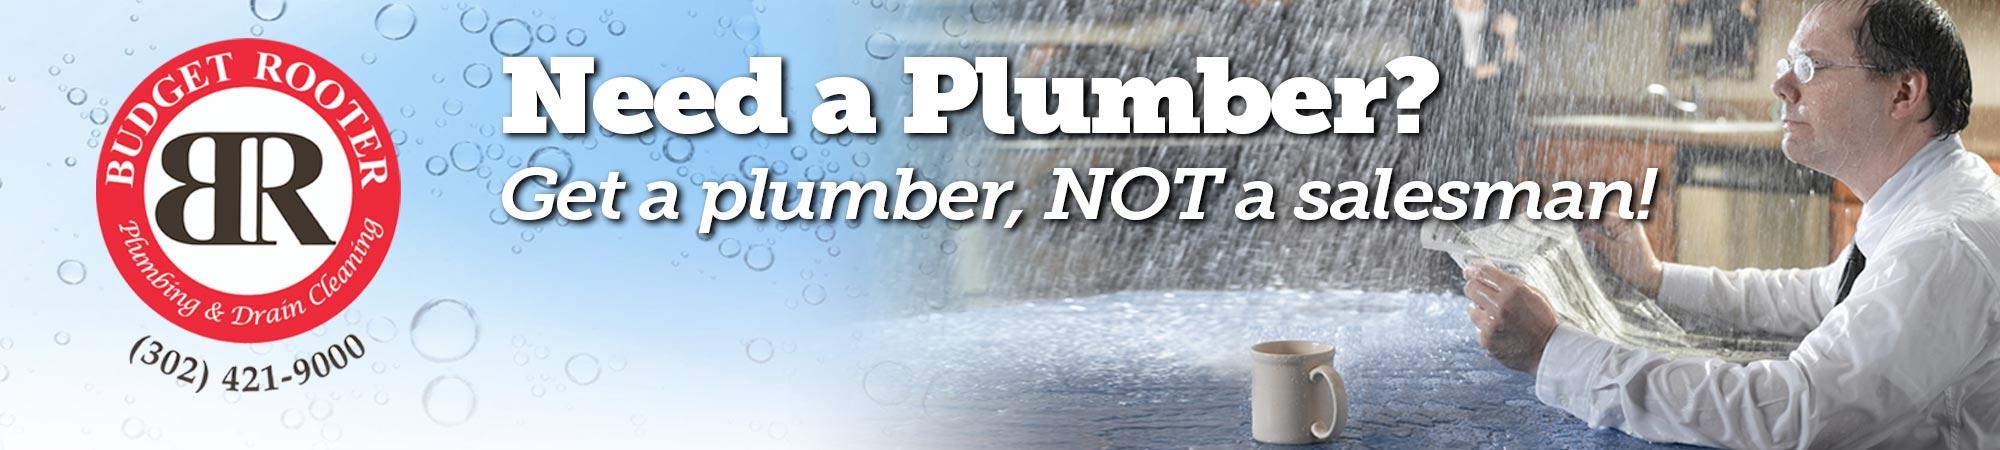 Plumbing Services by Budget Rooter in New Castle County, DE